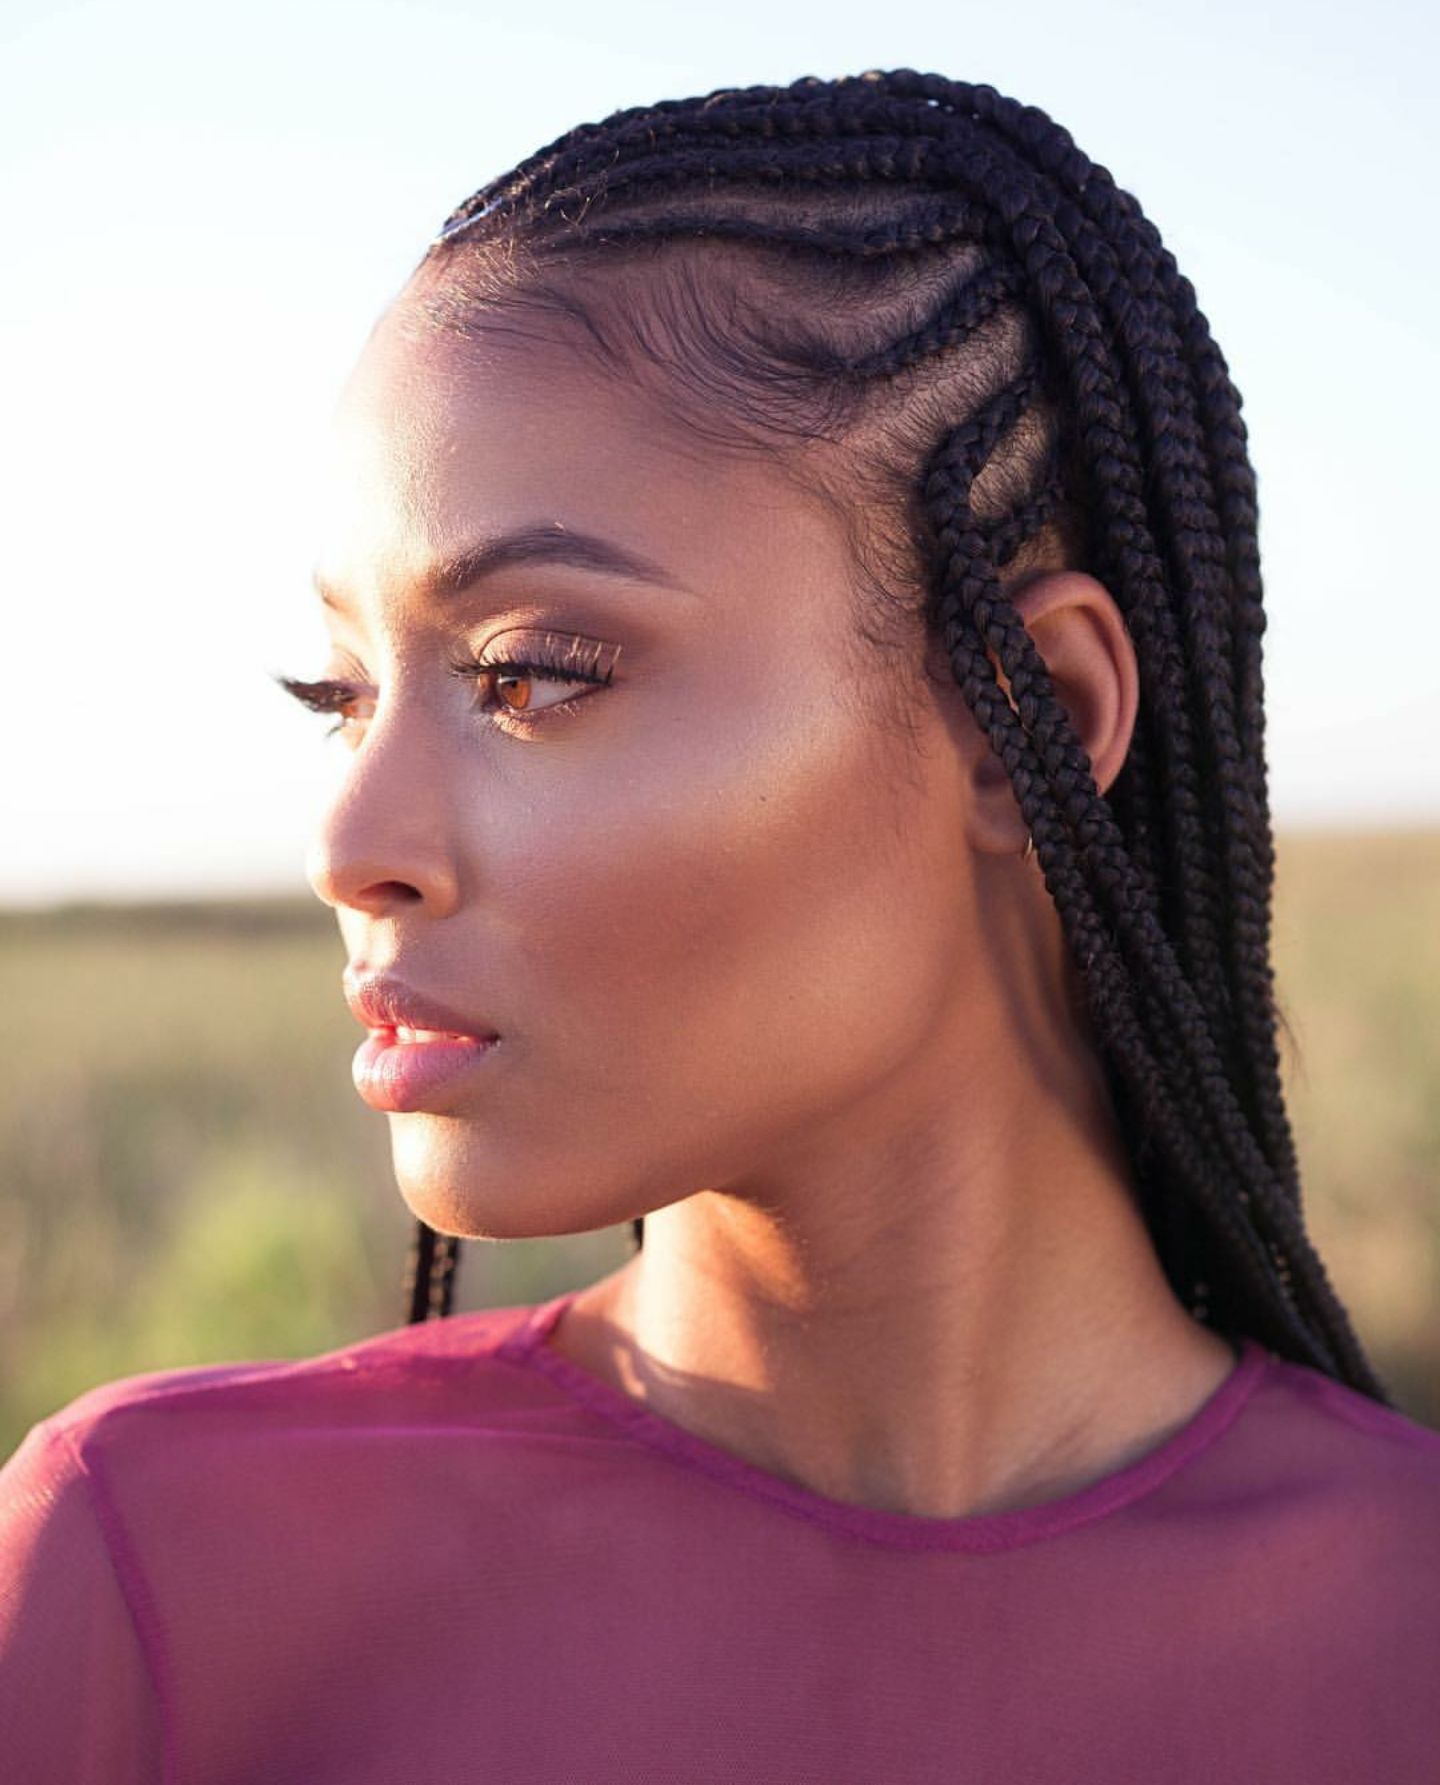 Well Known Cornrows Hairstyles To The Back Intended For Braidedupforthesummer 19 Magnificent Braided Styles To Rock This (View 8 of 15)